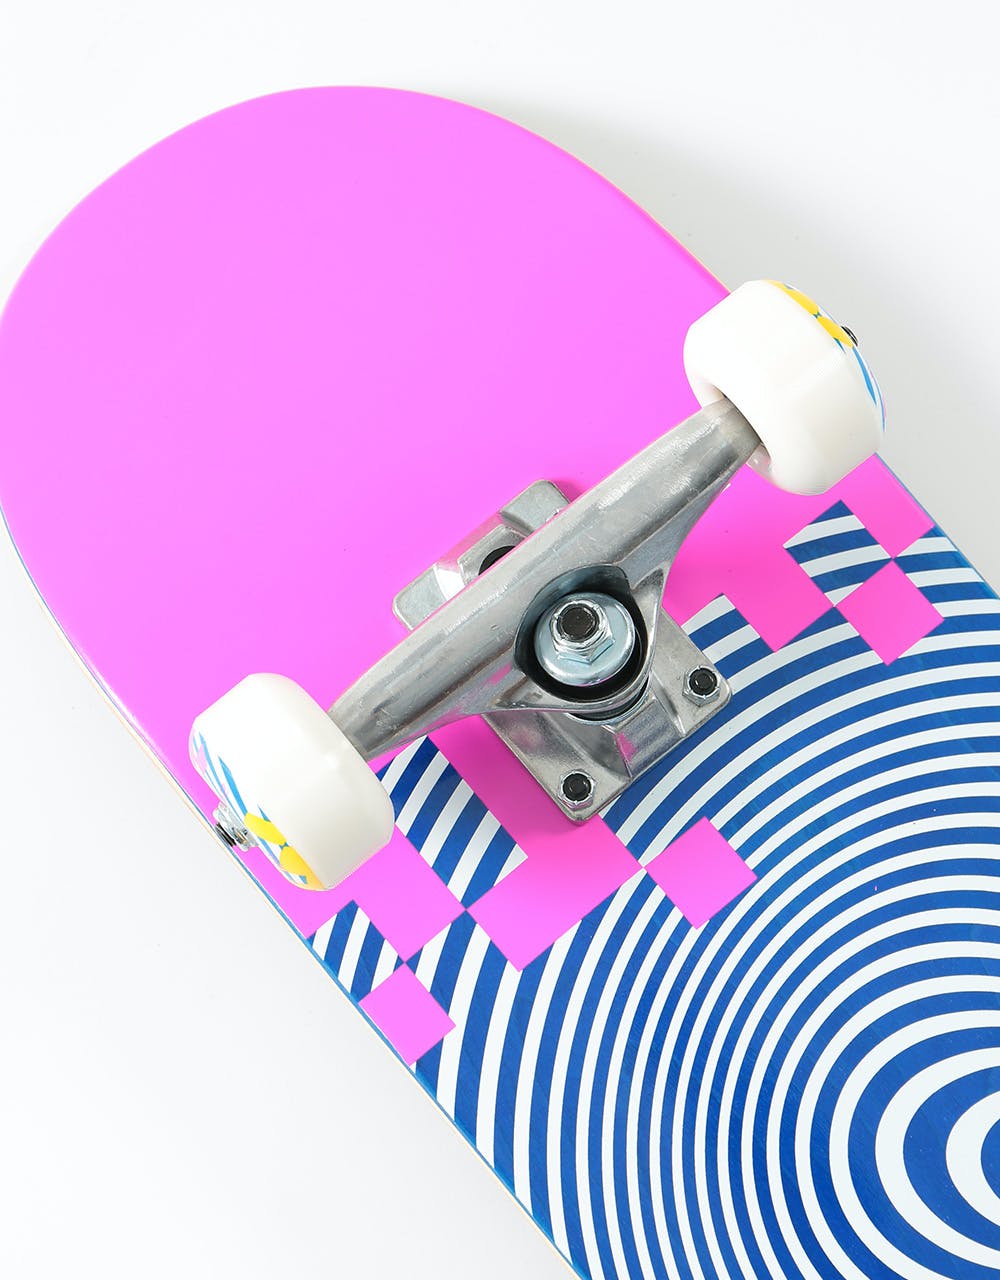 Route One Pixwirl Complete Skateboard - 7.75"